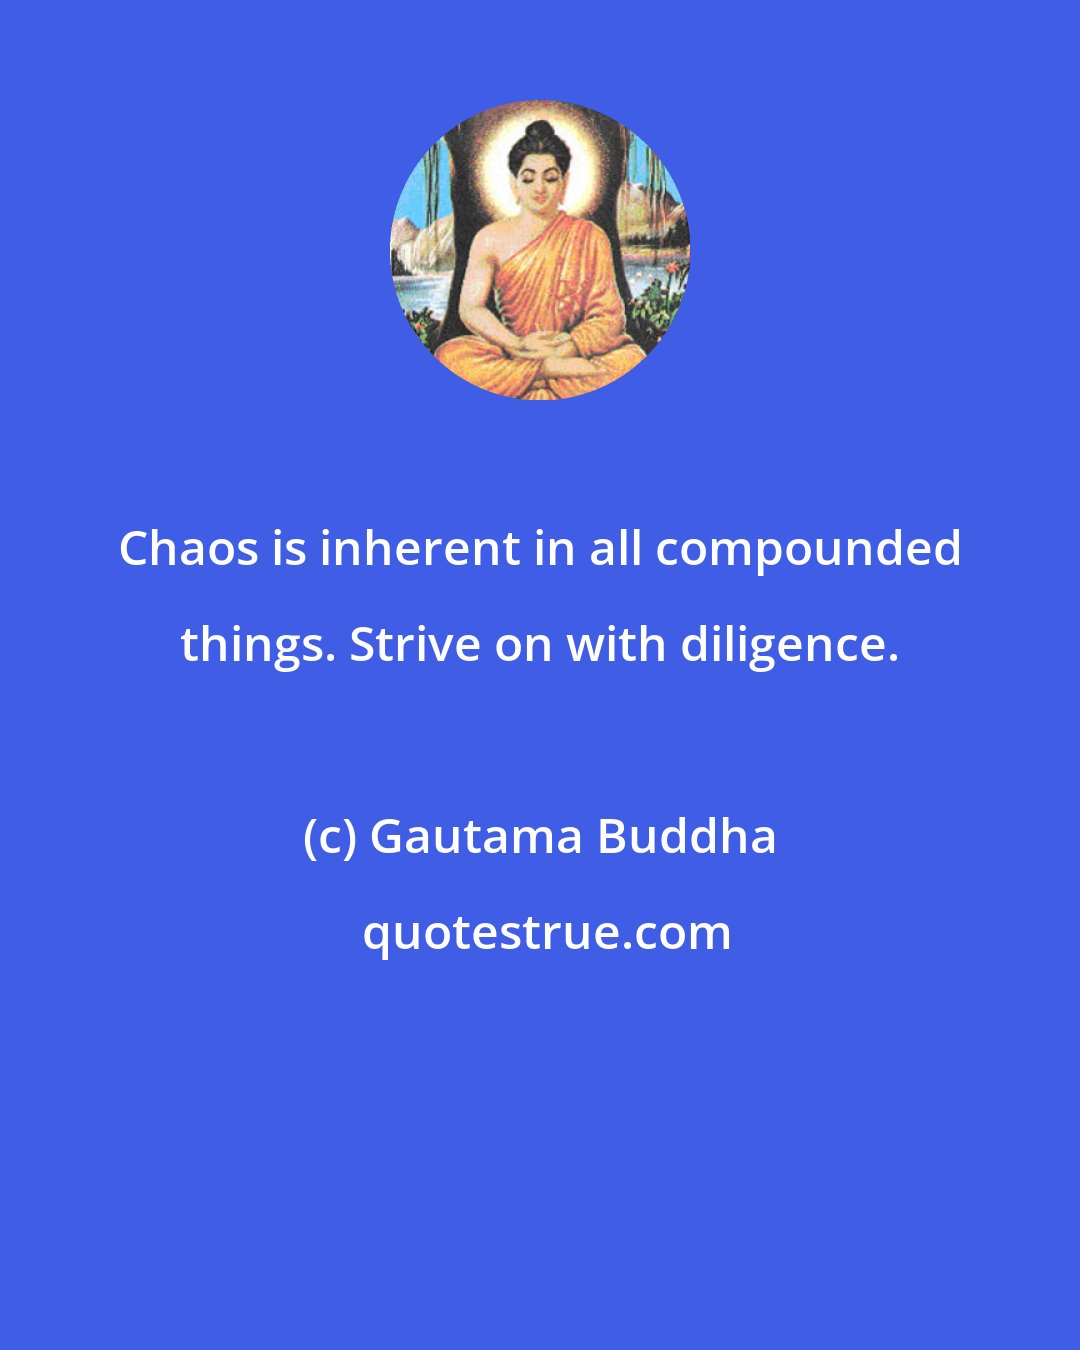 Gautama Buddha: Chaos is inherent in all compounded things. Strive on with diligence.